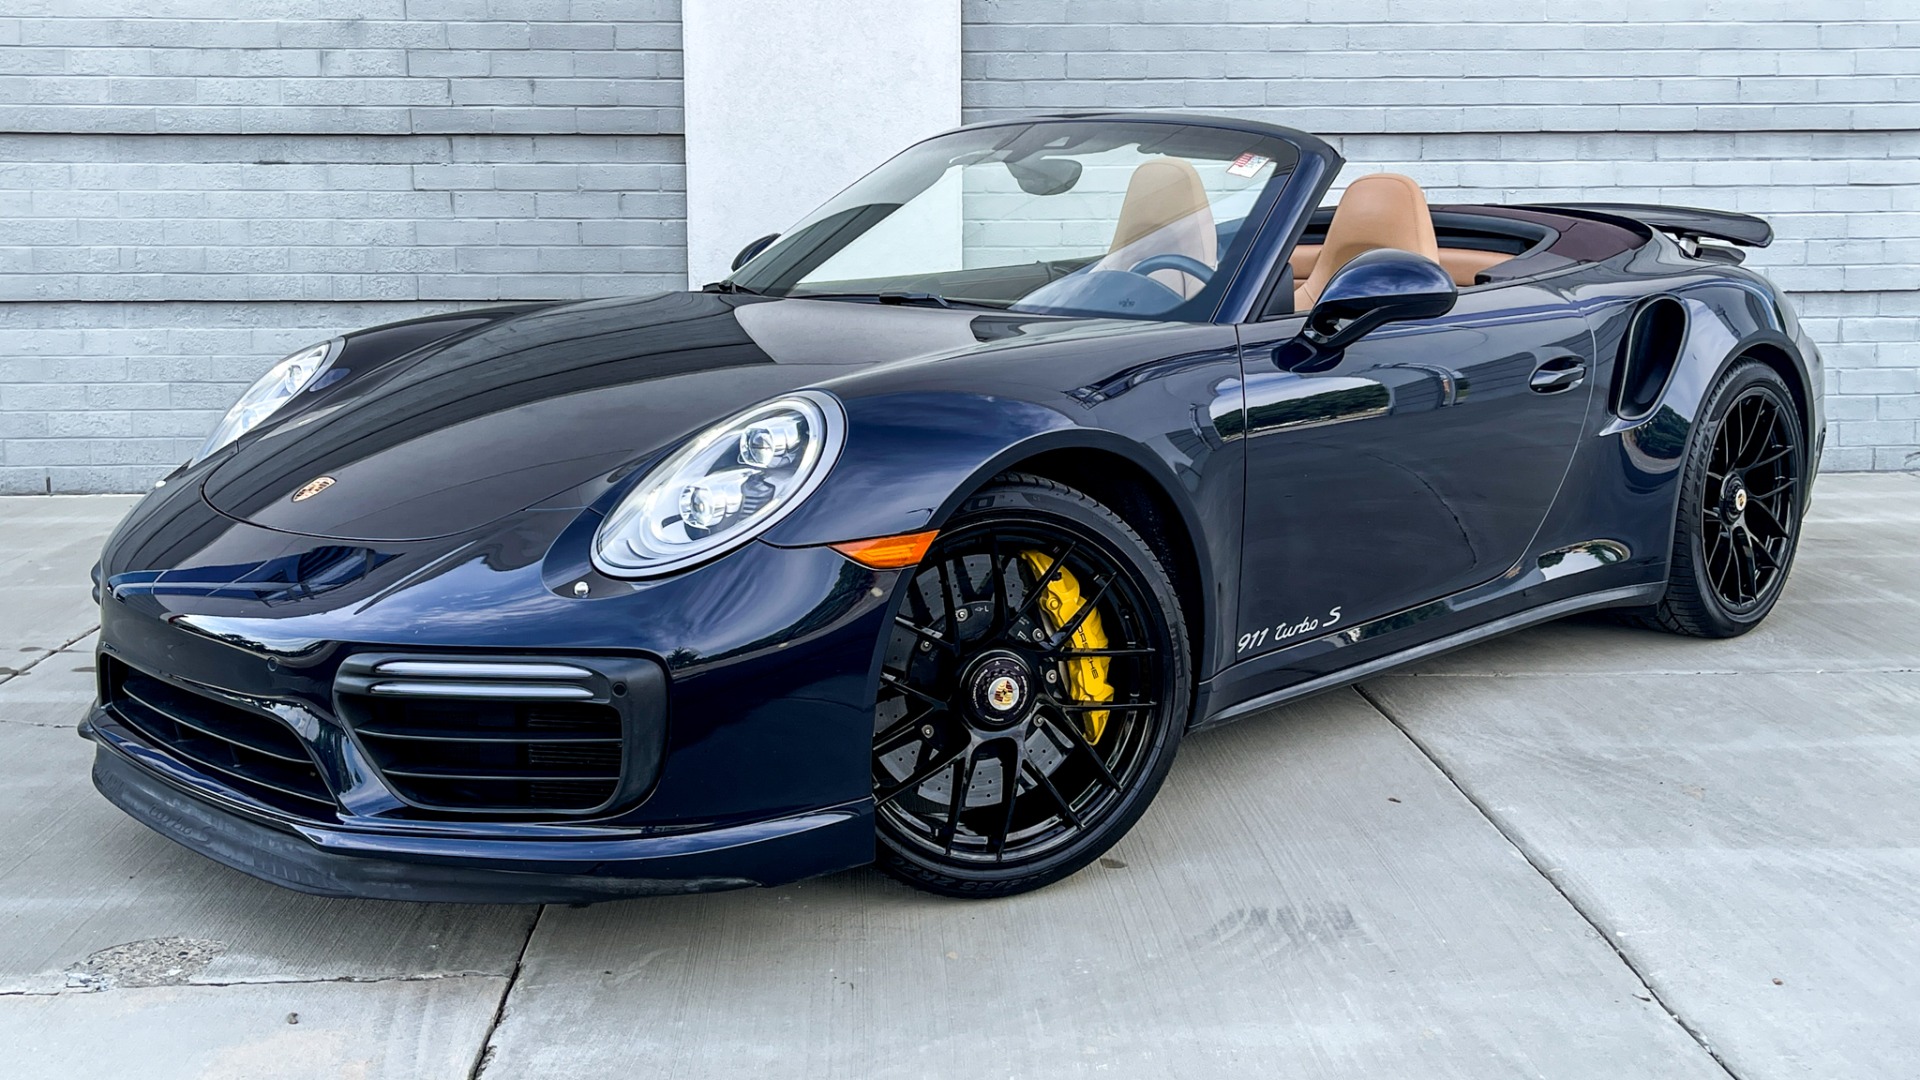 Used 2017 Porsche 911 Turbo S / CABRIOLET / FRONT LIFT / PDK / 20IN WHEELS for sale Sold at Formula Imports in Charlotte NC 28227 1